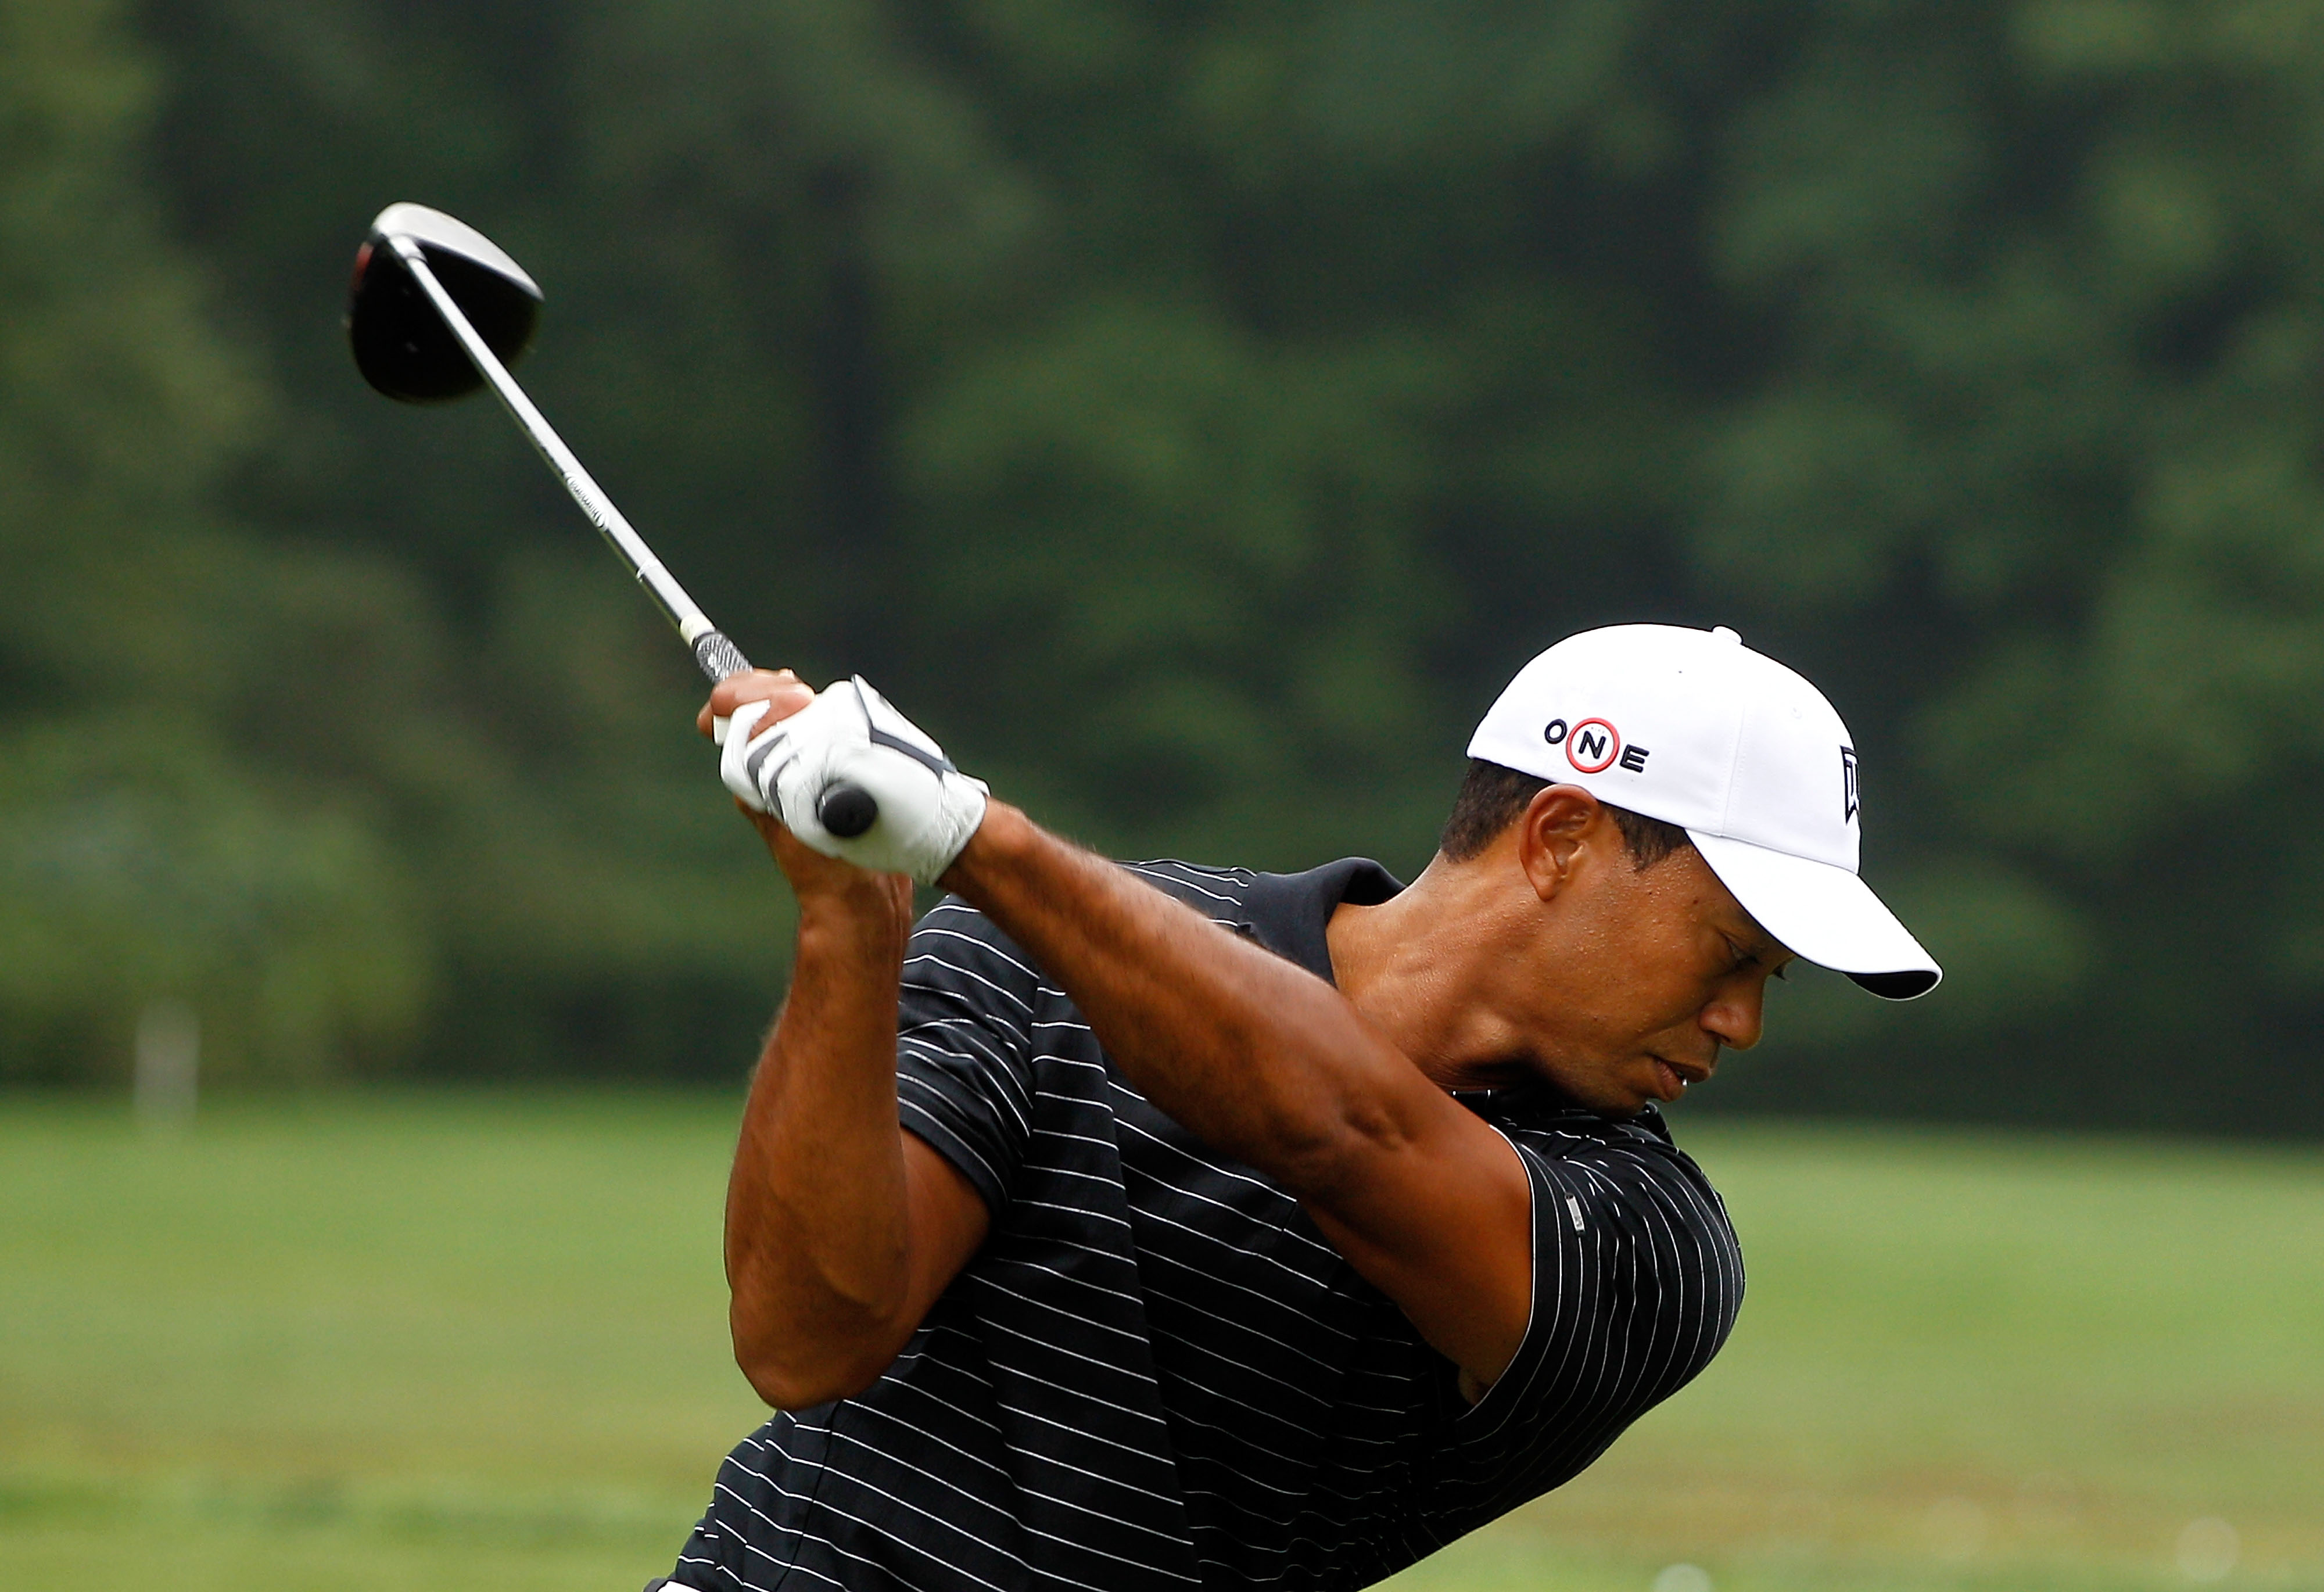 PARAMUS, NJ - AUGUST 25:  Tiger Woods hits a shot on the practice ground after the pro-am prior to the start of The Barclays at the Ridgewood Country Club on August 25, 2010 in Paramus, New Jersey.  (Photo by Scott Halleran/Getty Images)